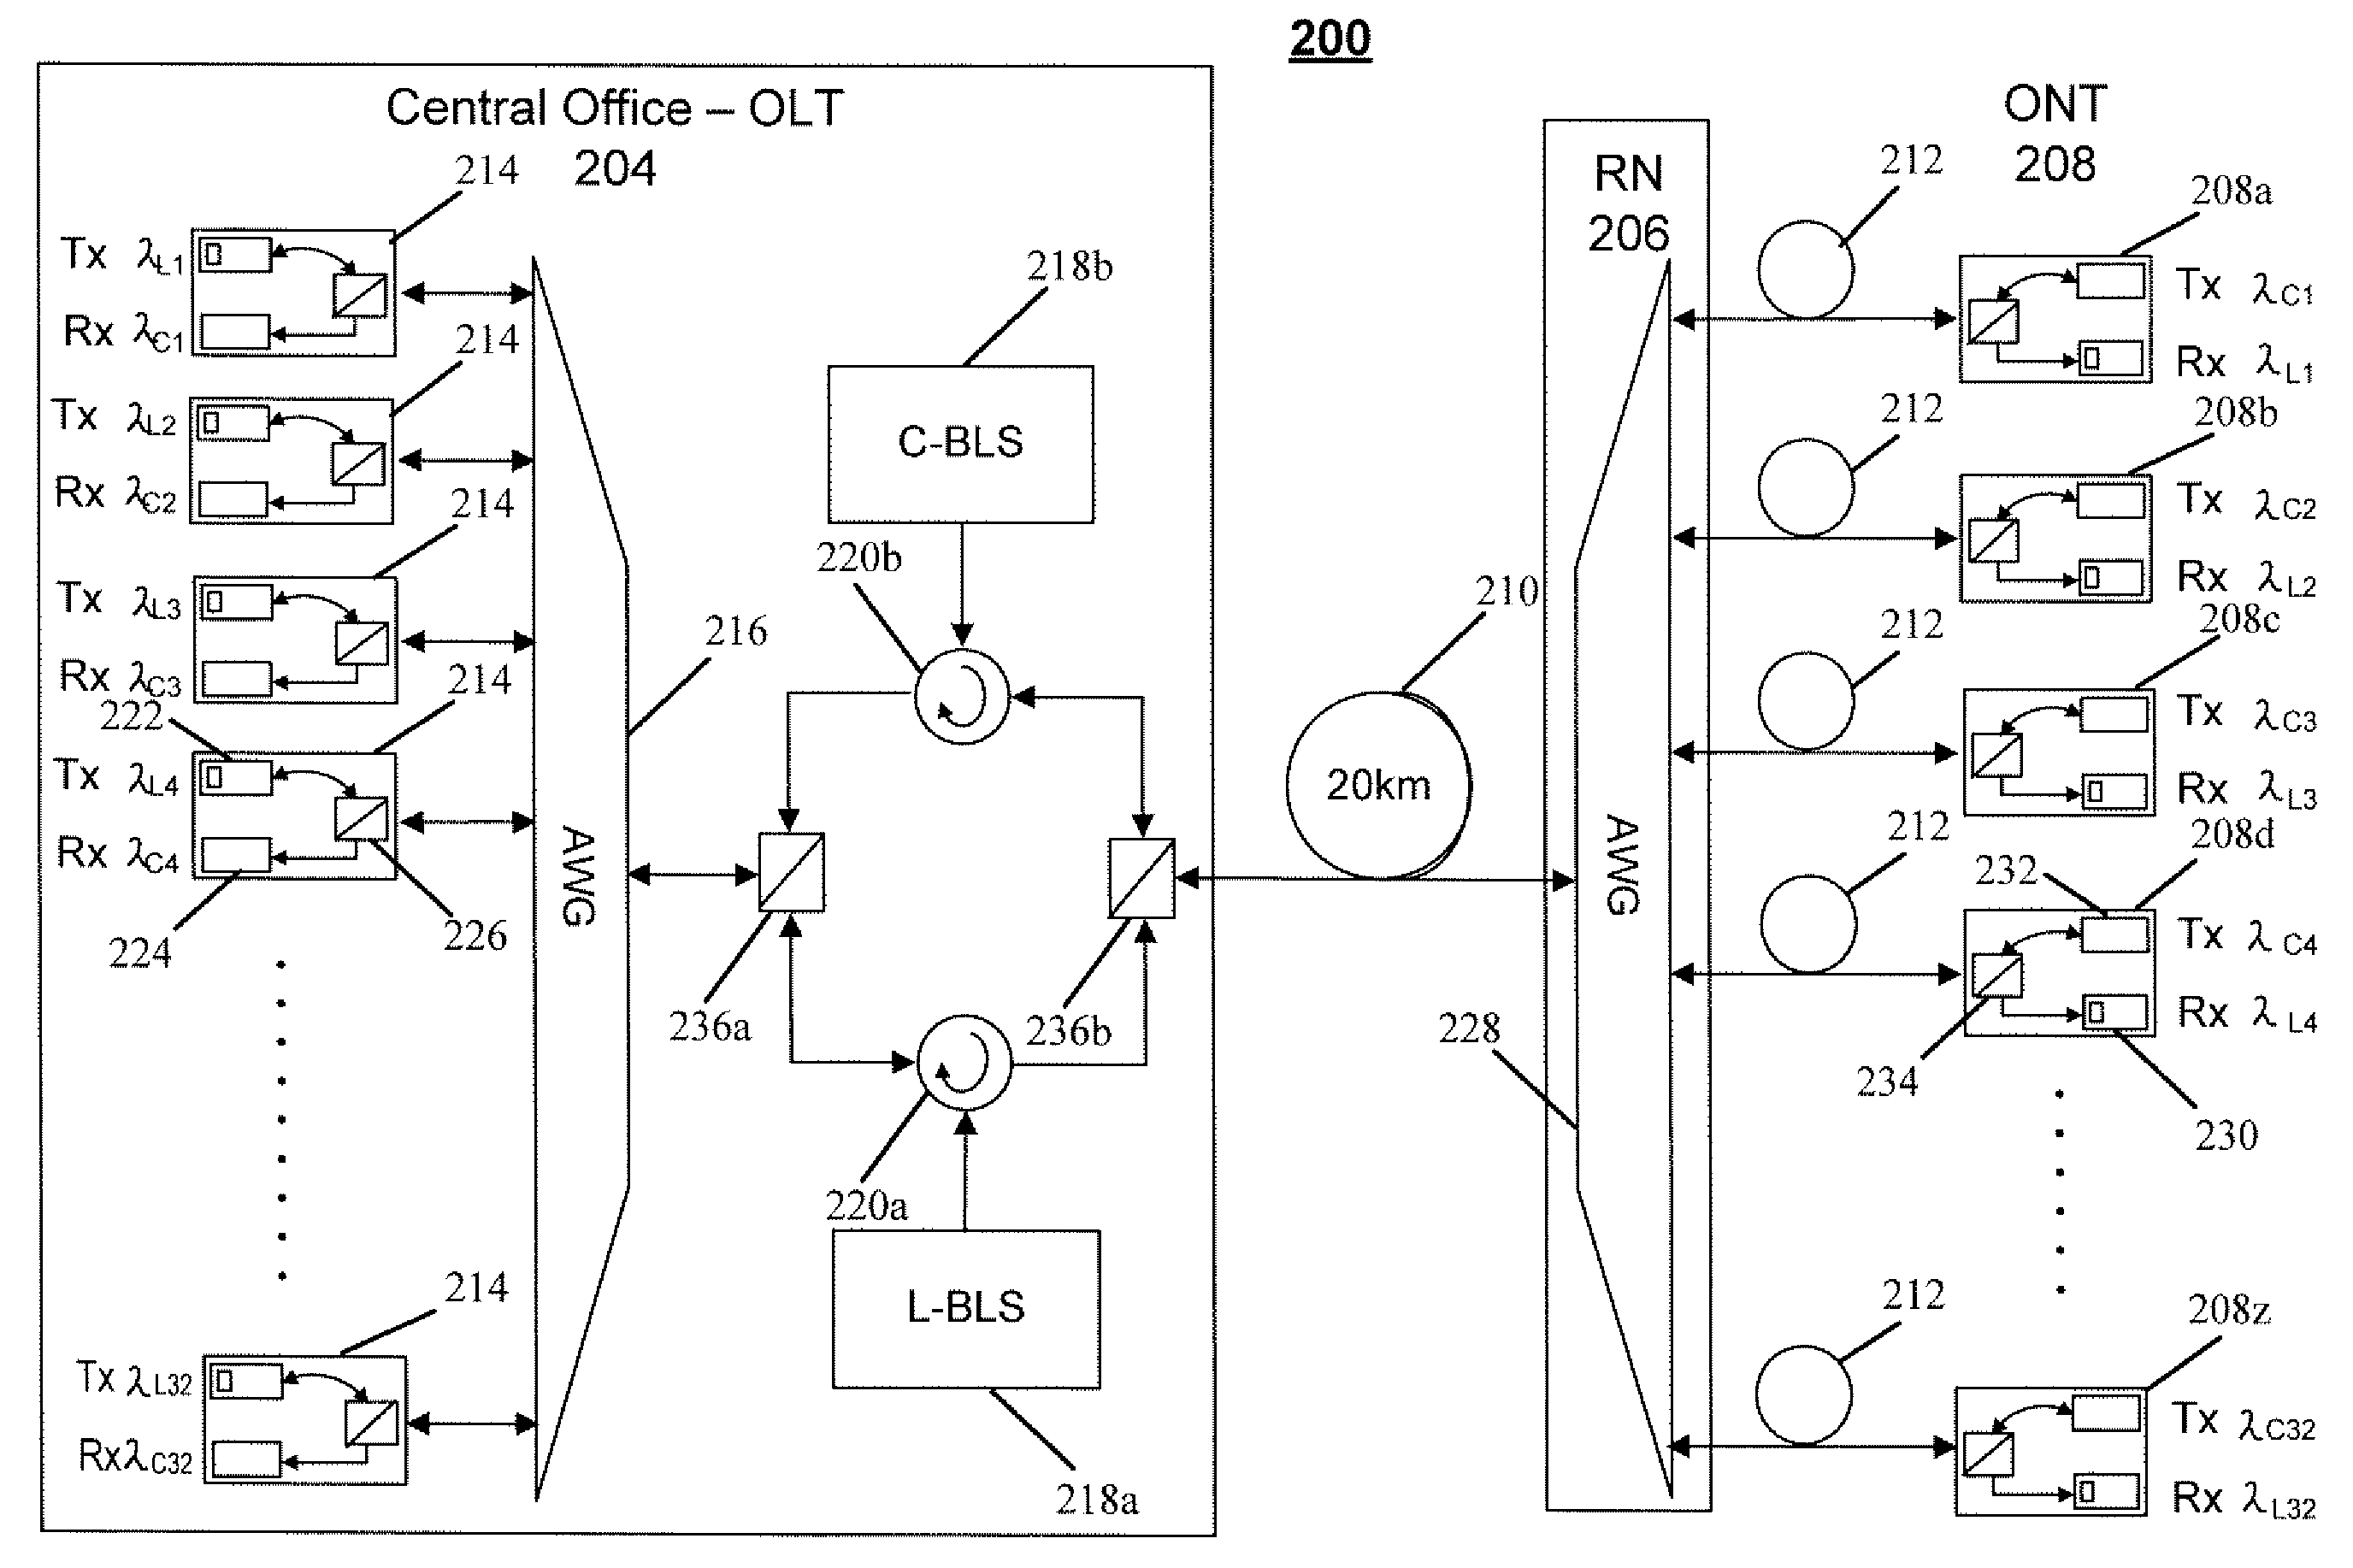 Techniques for controlling a light source in a wavelength division multiplexed passive optical network